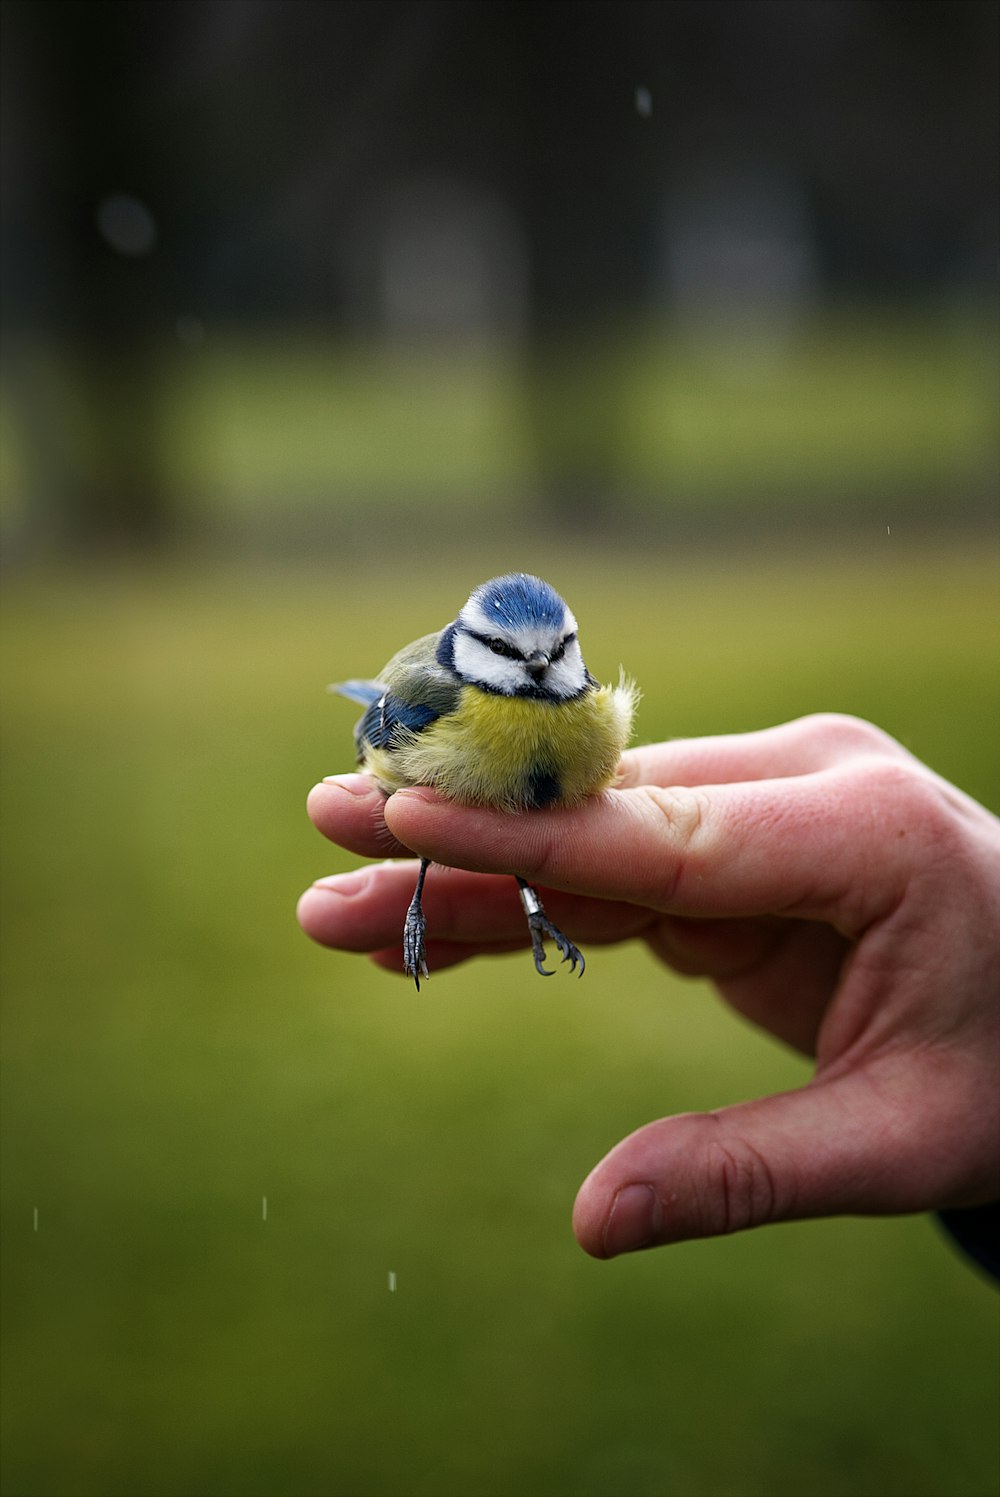 a small blue and white bird perched on a persons hand